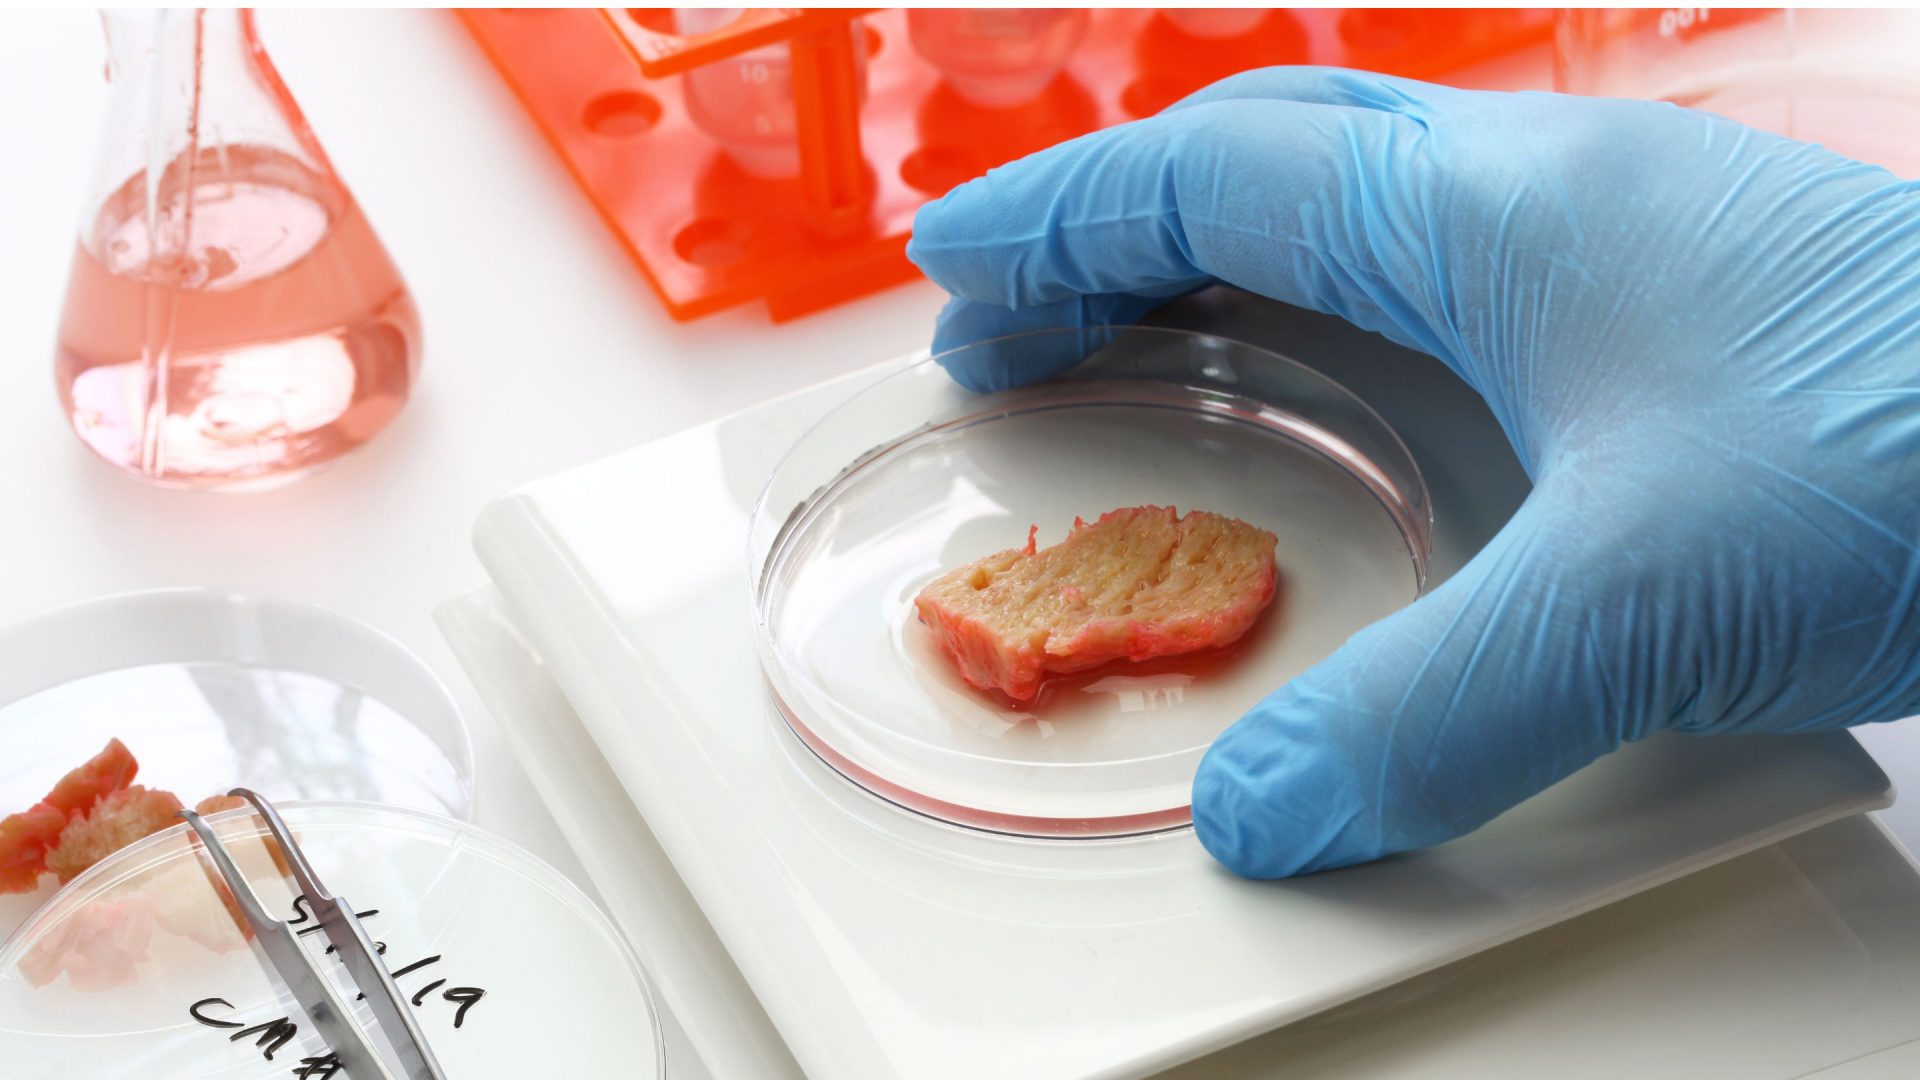 GreyB-innovation-trends-2023-lab-grown-meat